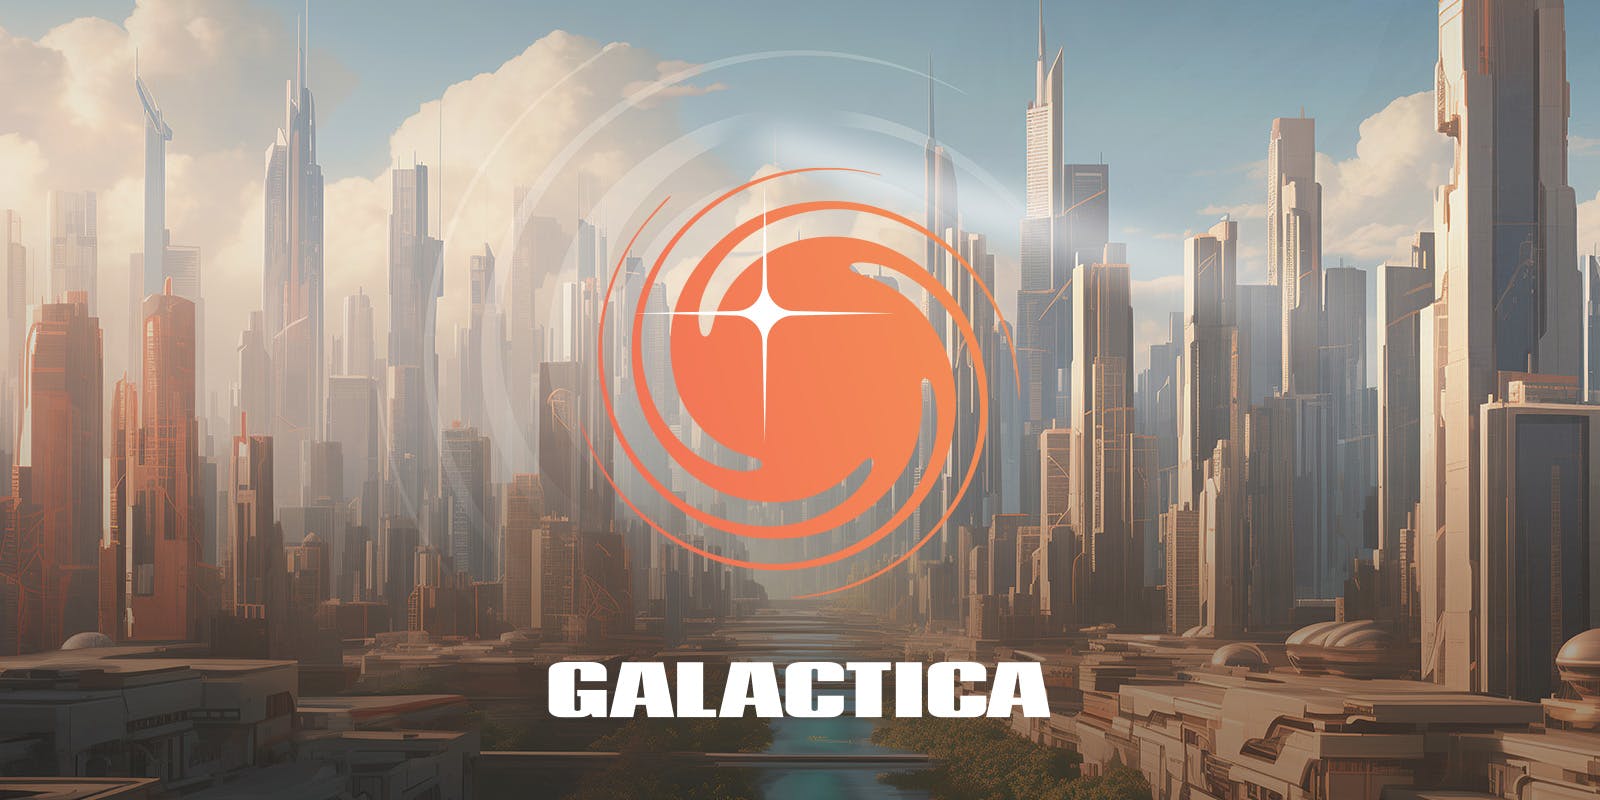 What is Galactica